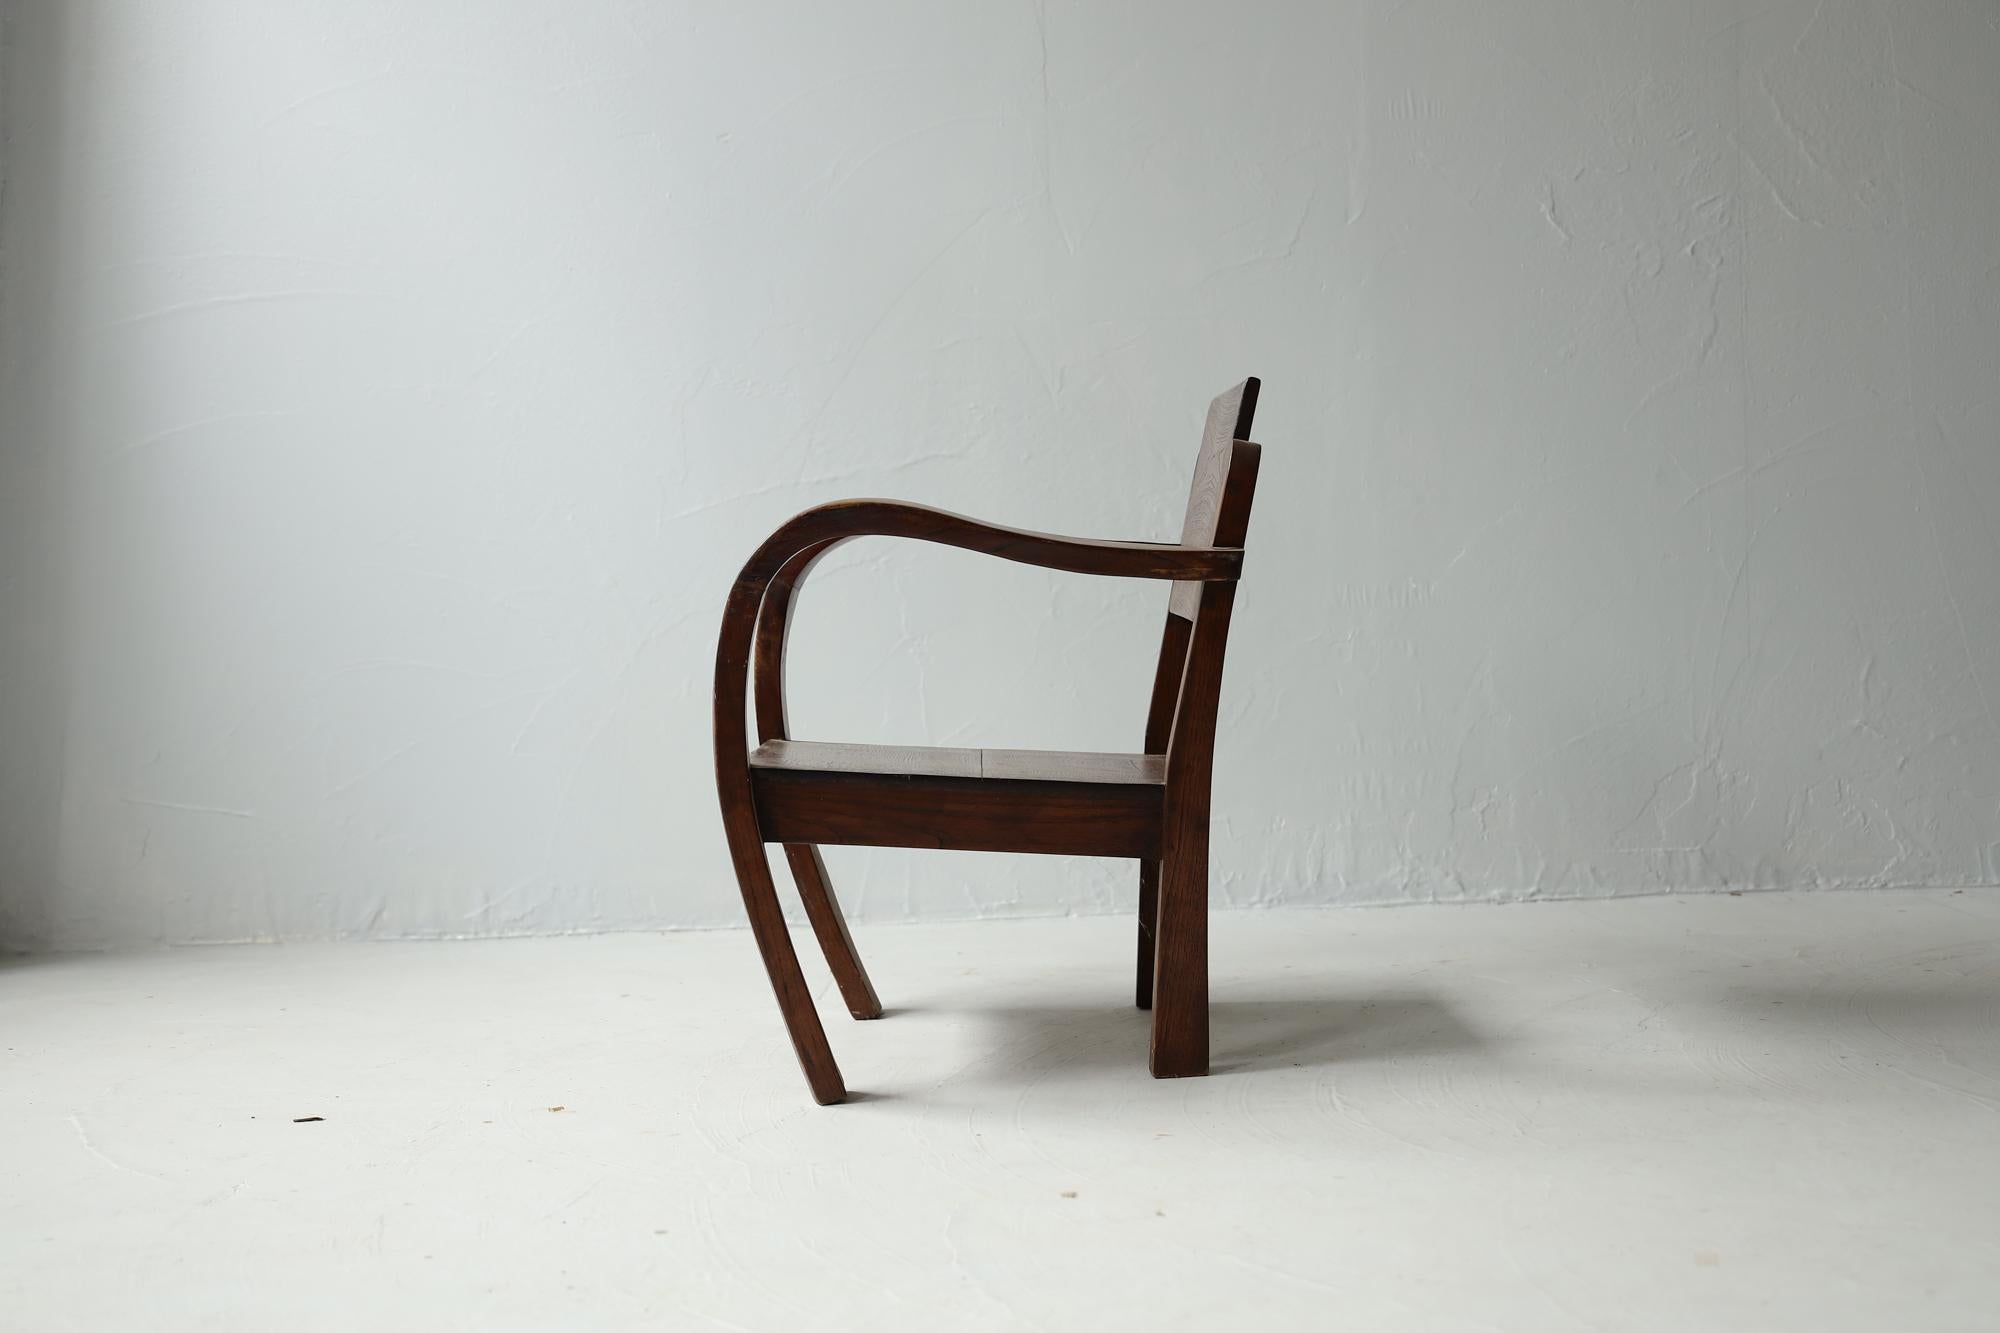 20th Century Japanese Antique Chair, Primitive Japanese Wooden Chair, Wabi-Sabi For Sale